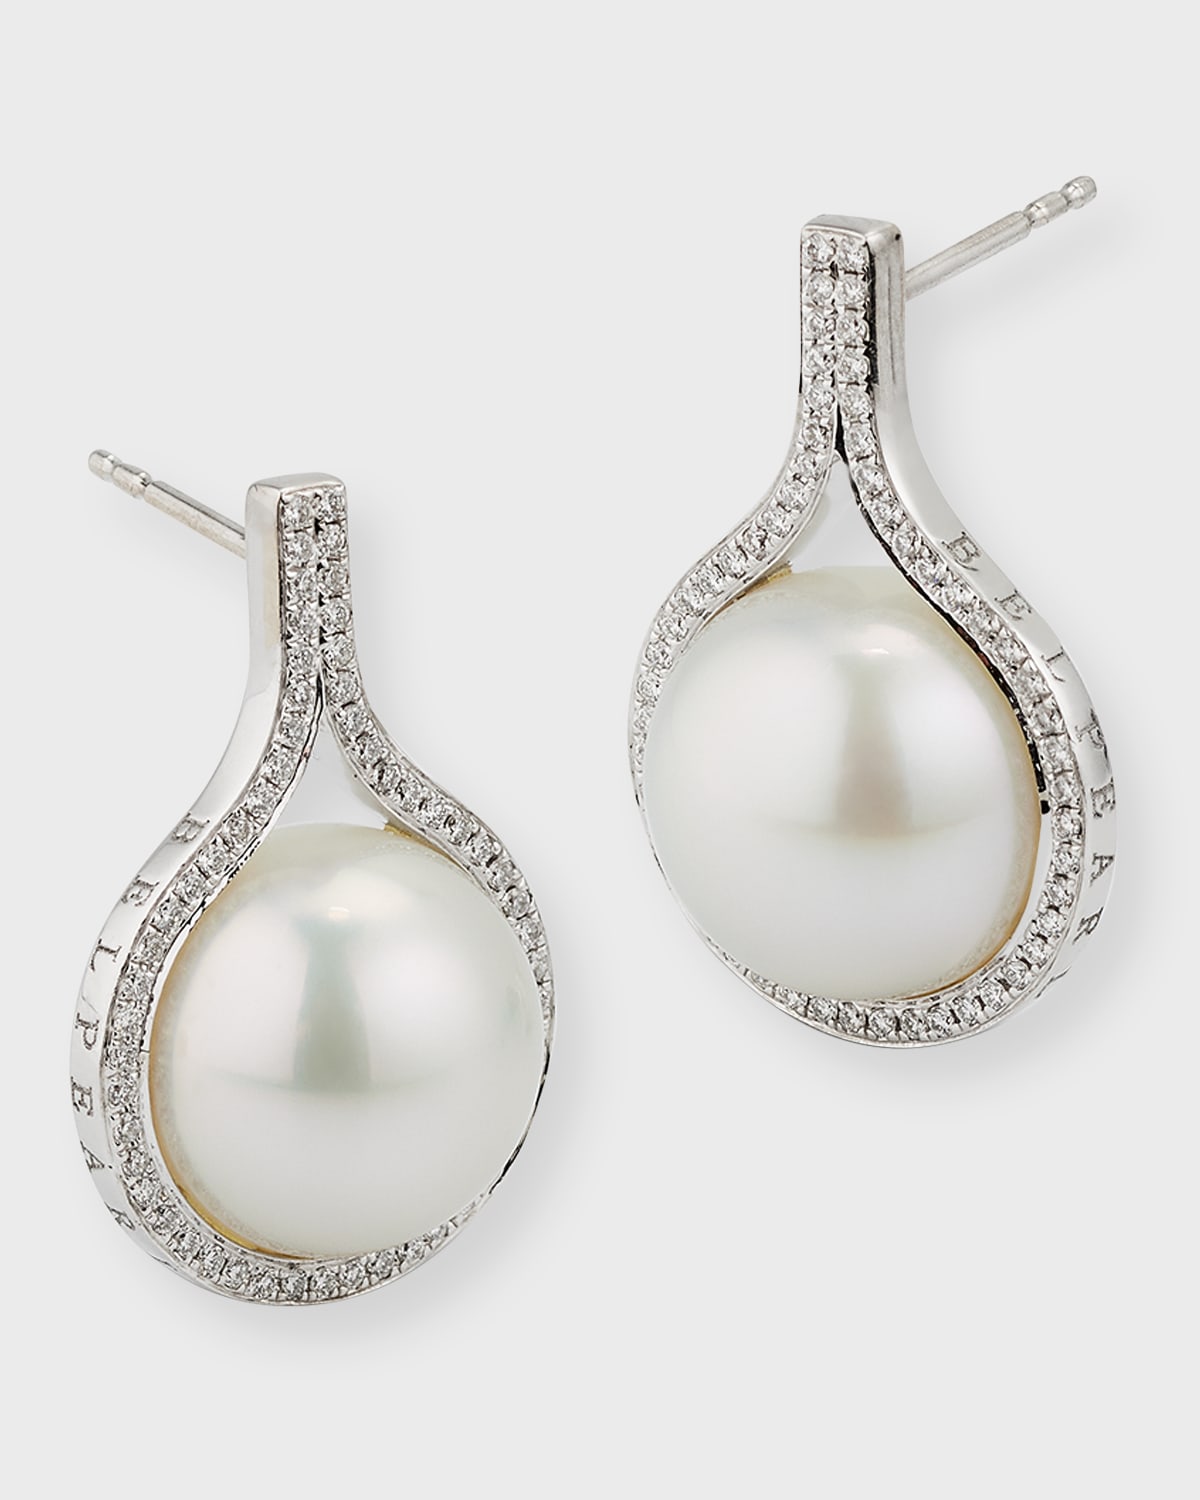 18K White Gold Pave Diamond and South Sea Pearl Earrings